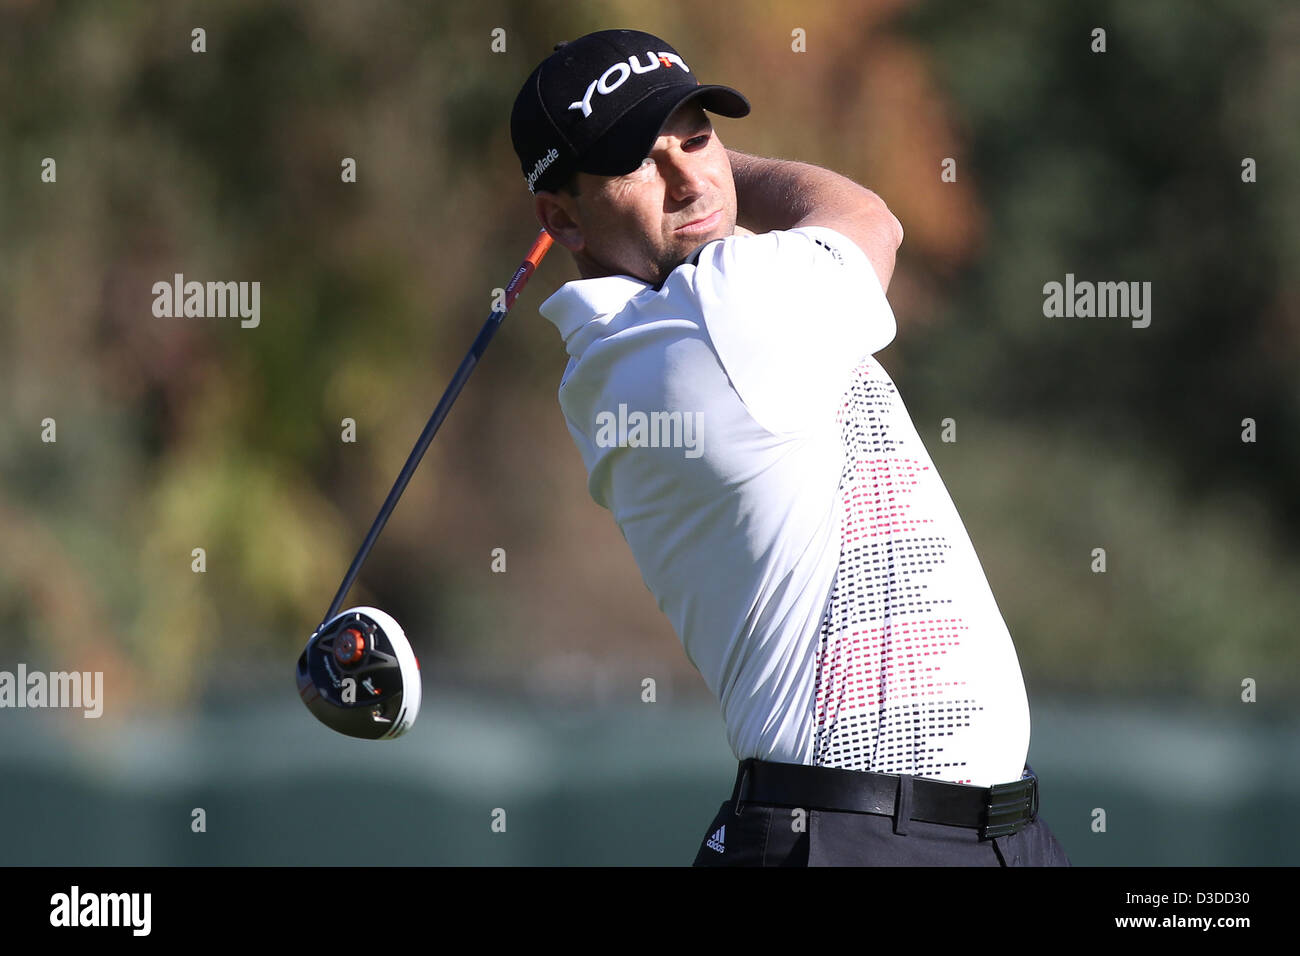 Feb. 14, 2013 - Pacific Palisades, California, U.S. - 02/13/13 Pacific Palisades, CA: Sergio Garcia during the first round of the Northern Trust Open held at Riviera Country Club. (Credit Image: © Michael Zito/Eclipse/ZUMAPRESS.com) Stock Photo